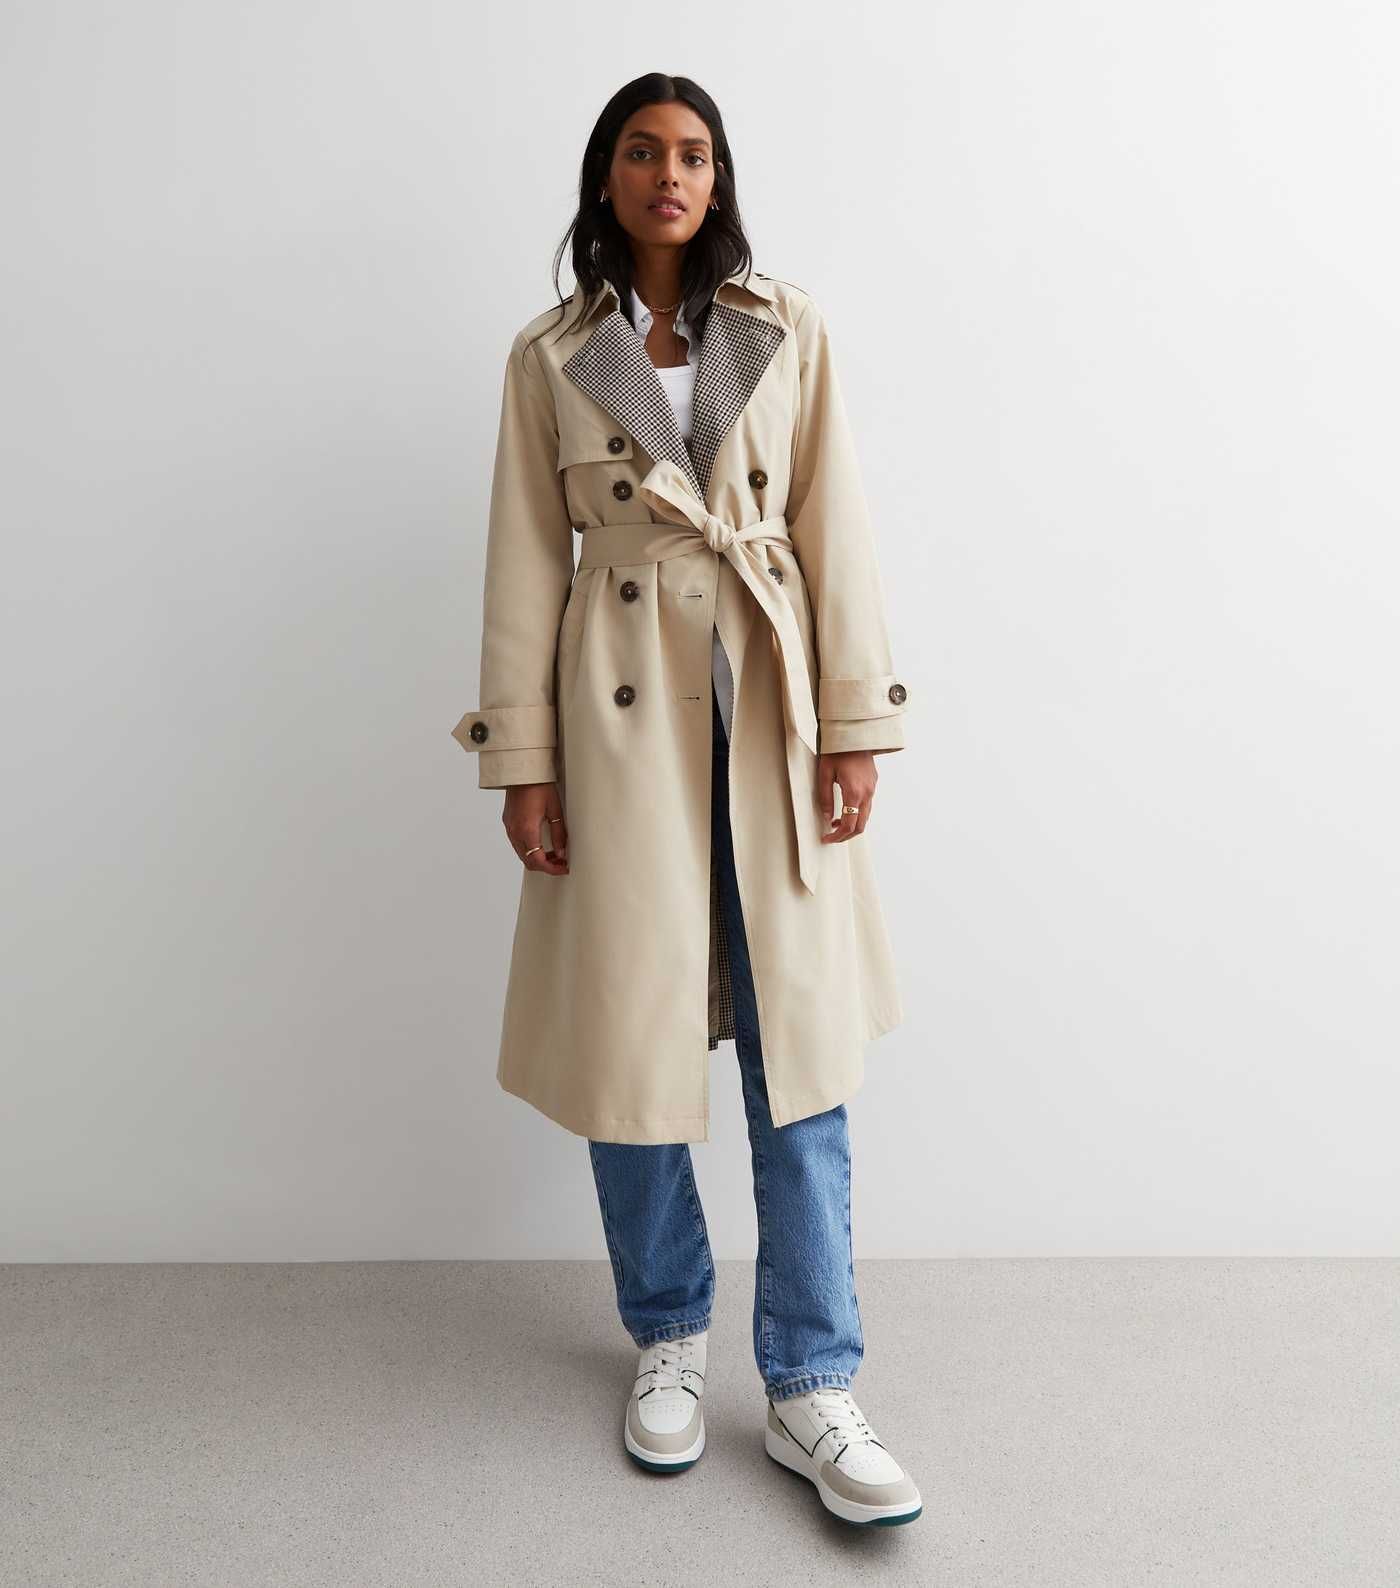 Stone Check Revere Collar Belted Trench Coat
						
						Add to Saved Items
						Remove from Sa... | New Look (UK)